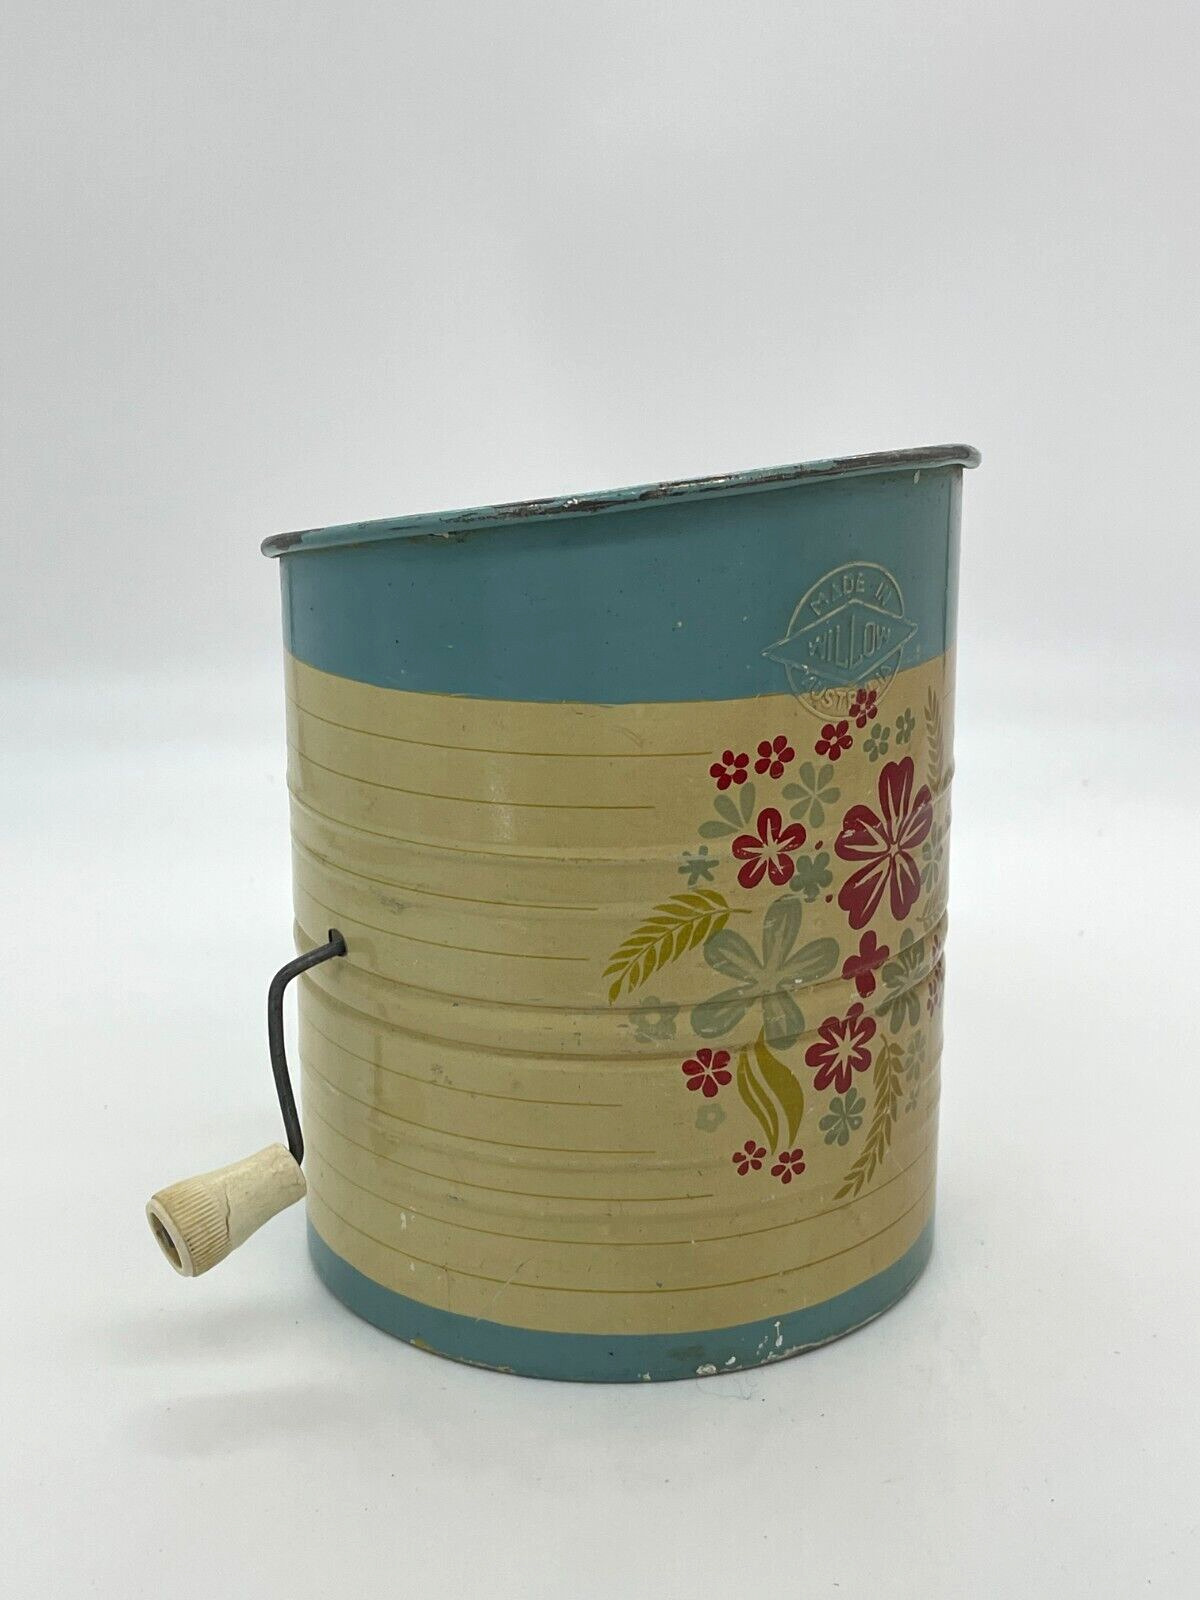 Vintage Willow Metal Flour Sifter, w Floral Design, Kitchenalia Collectable